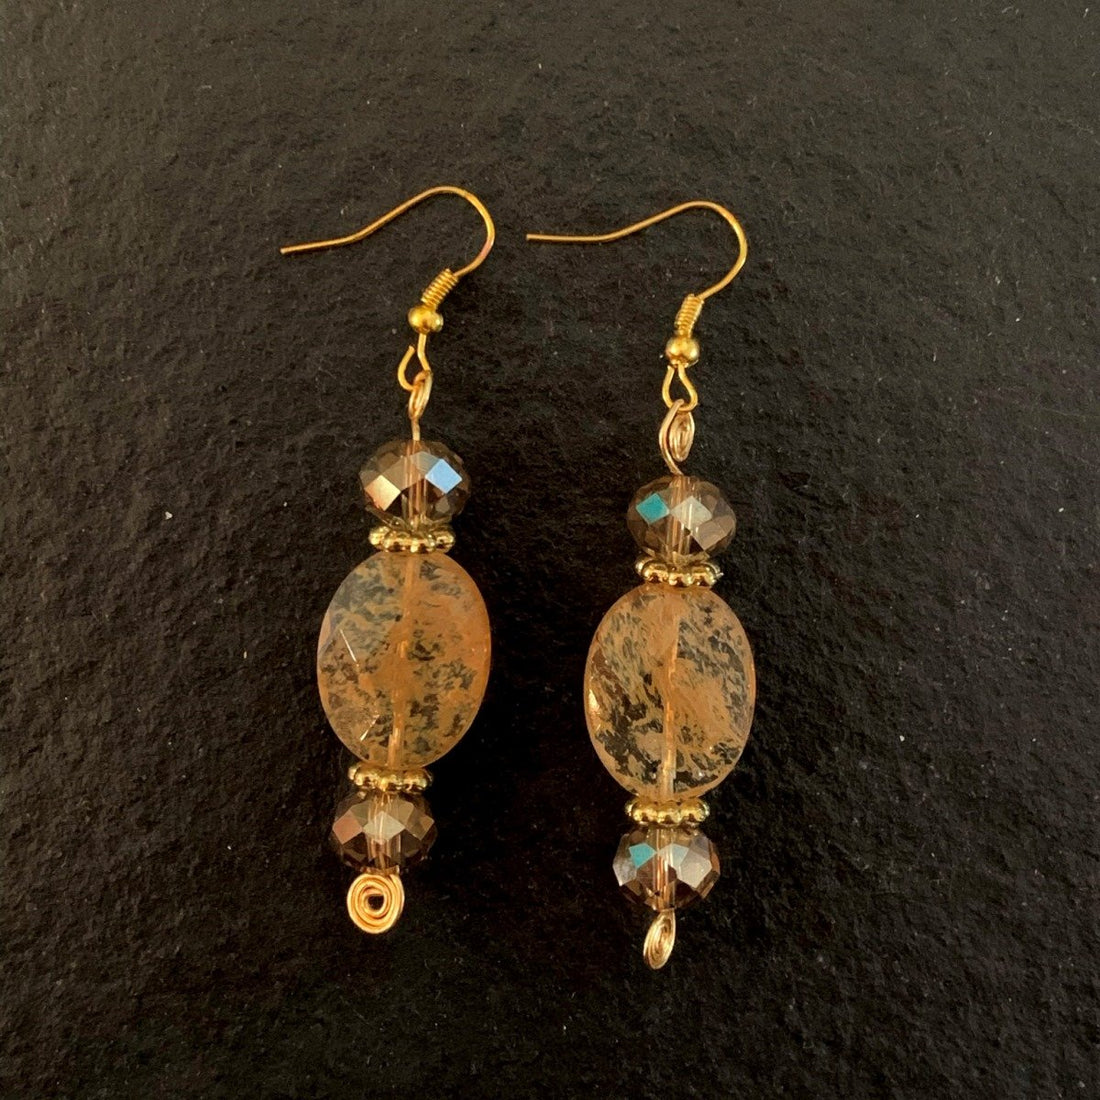 Earrings made of Large Golden Dendritic Agates with crystal rondels